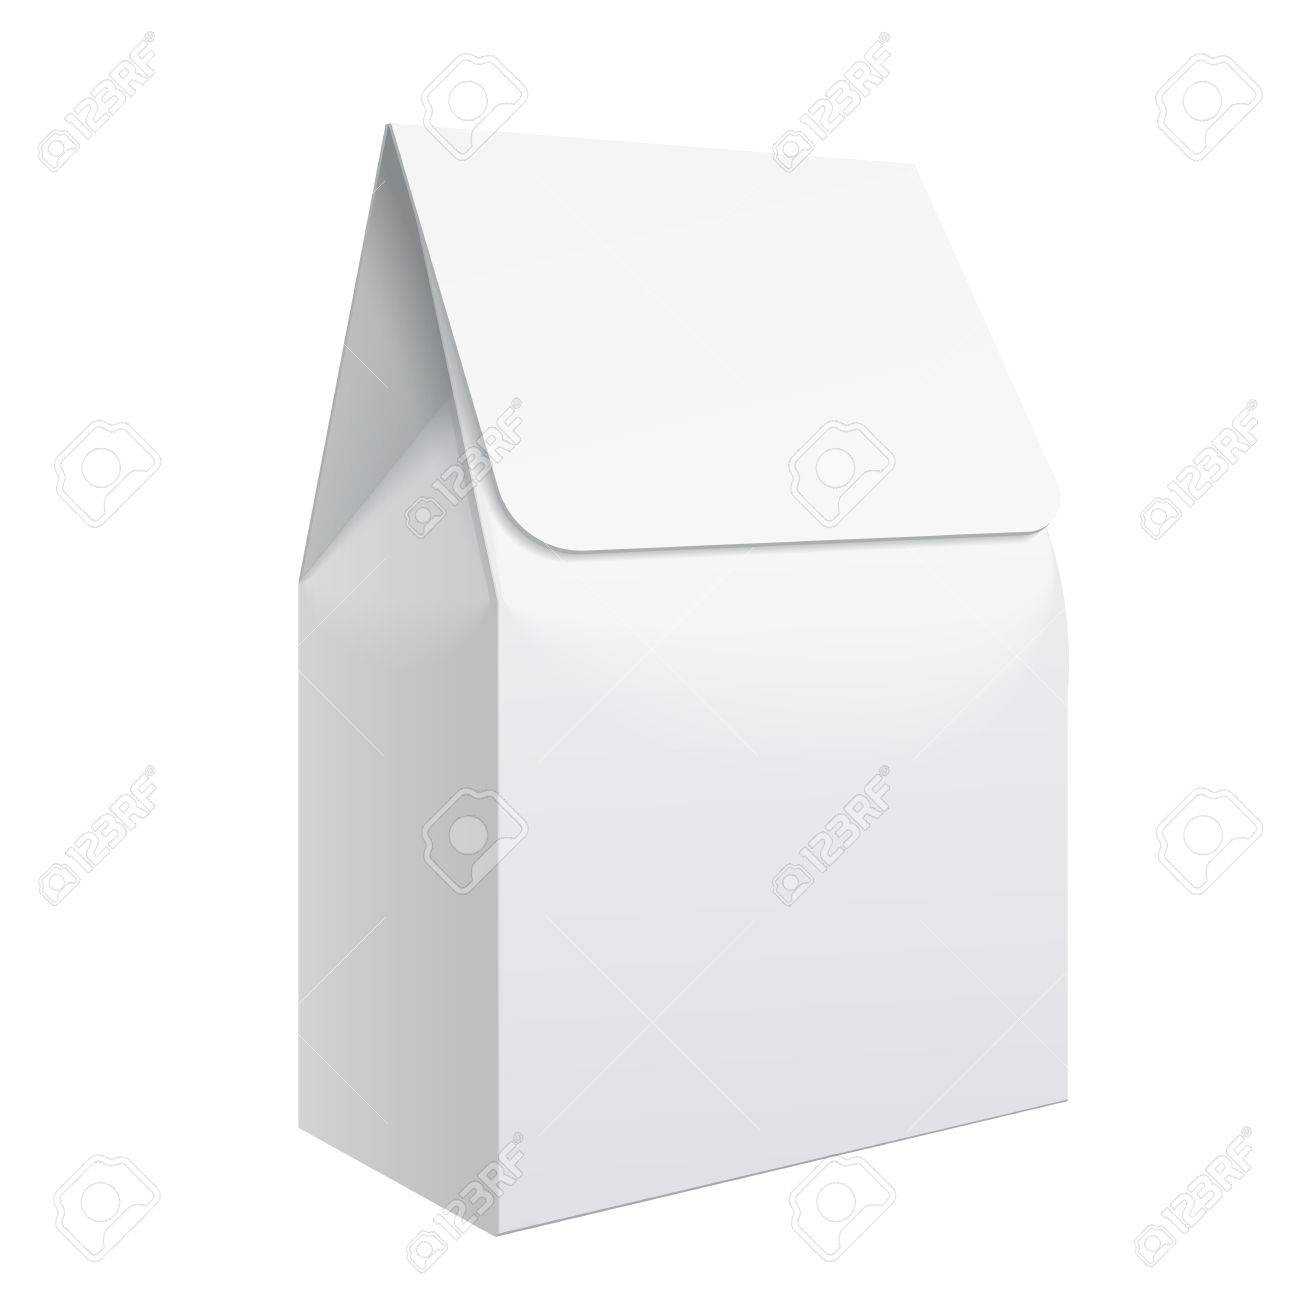 Realistic White Blank Template Packaging For Food. Food Packing.. Regarding Blank Packaging Templates